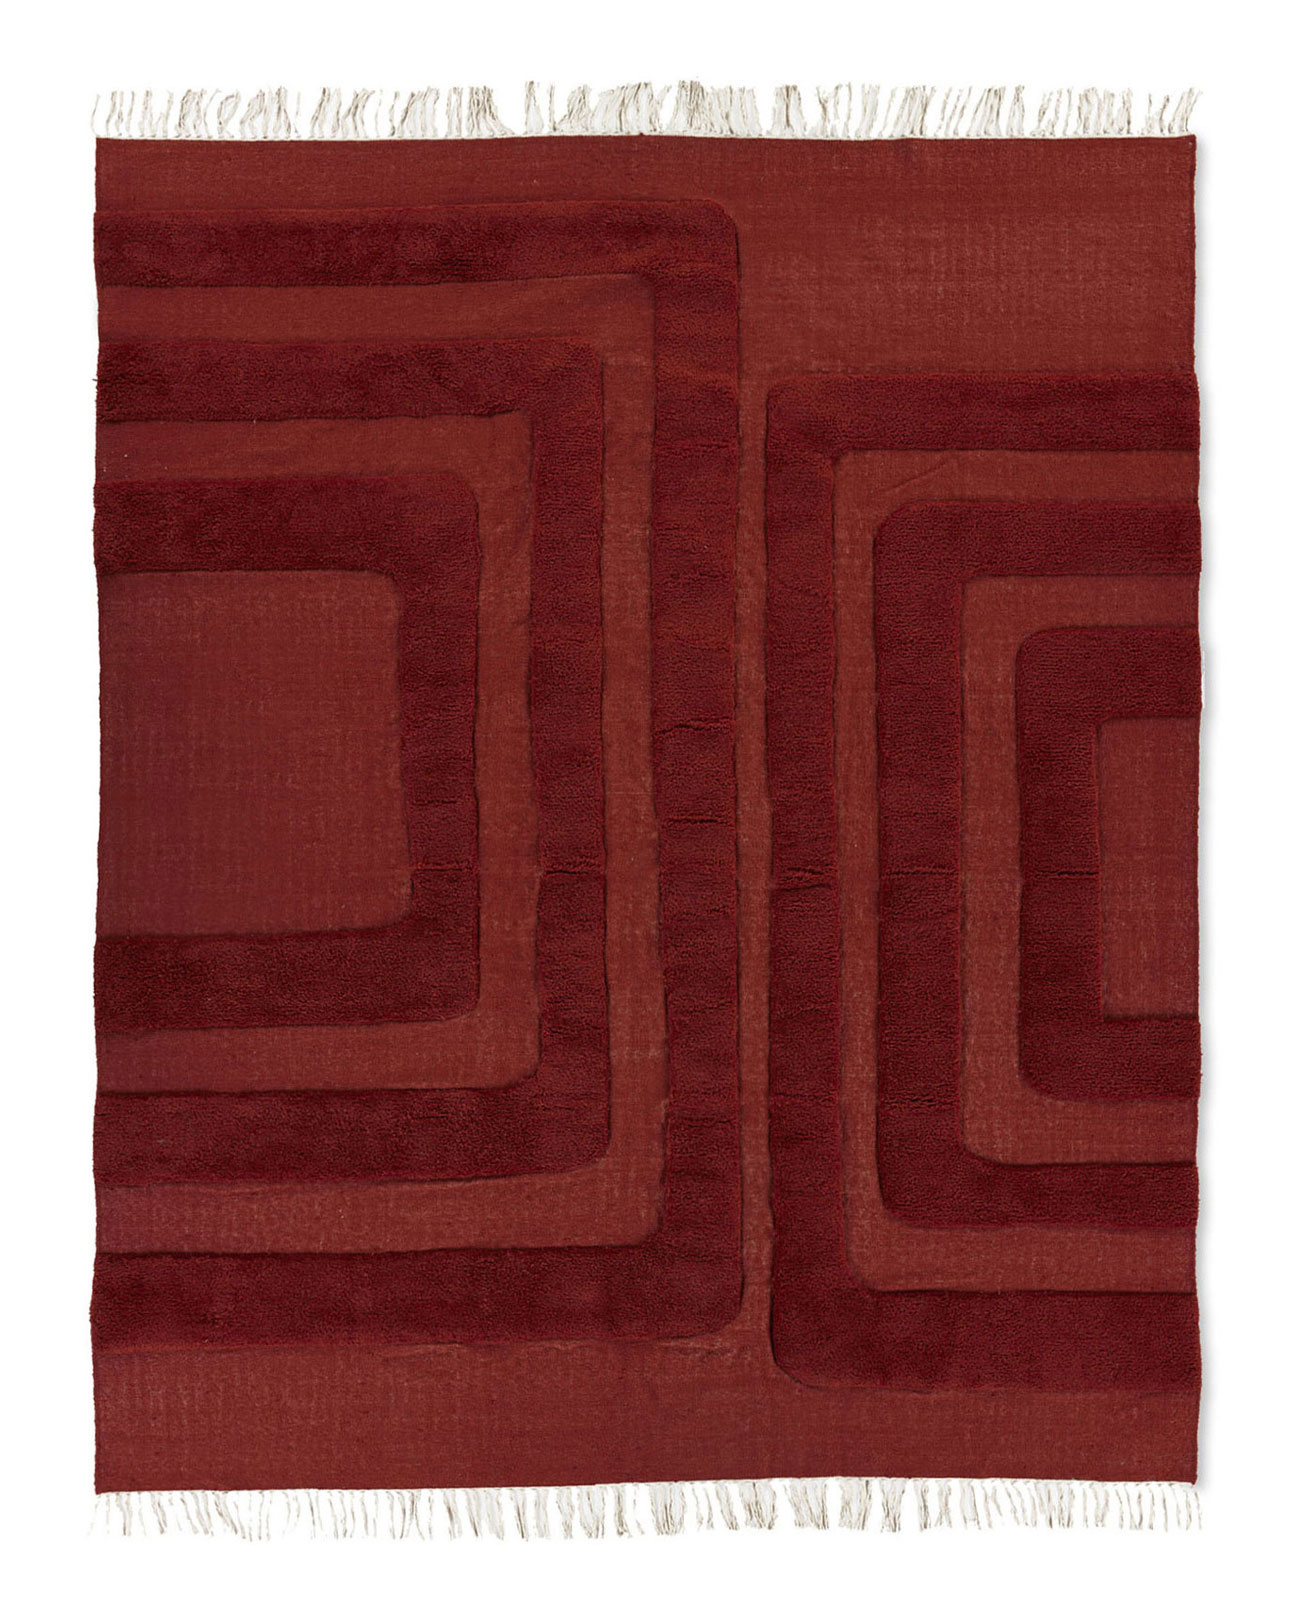 Woven deep red area rug with tufted organic archways and fringe.